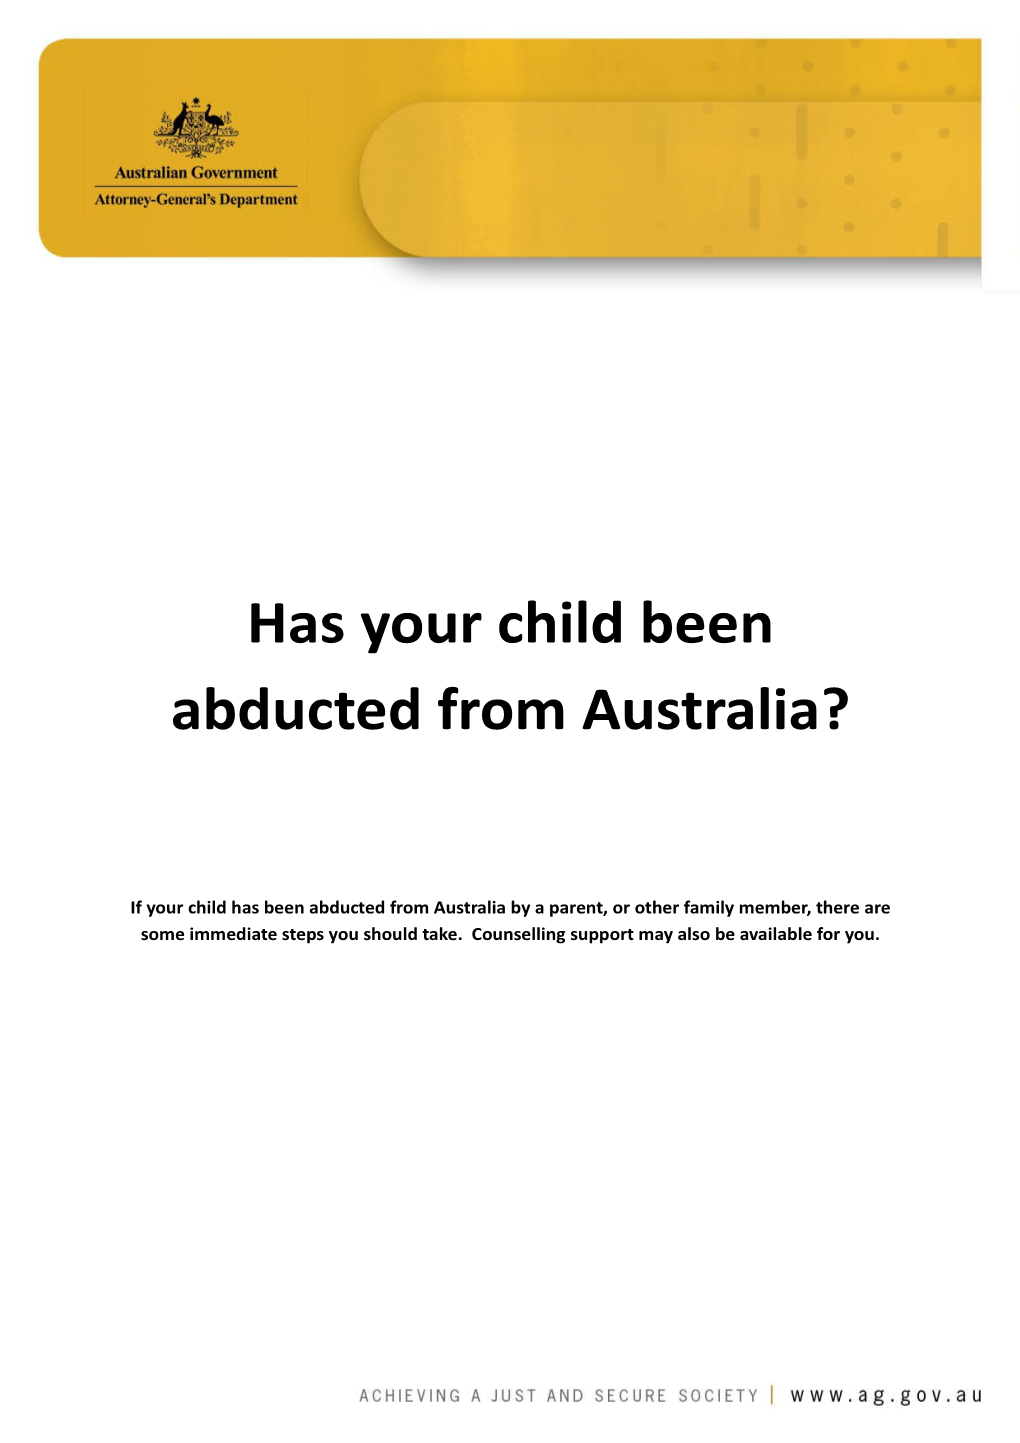 Has Your Child Been Abducted from Australia?